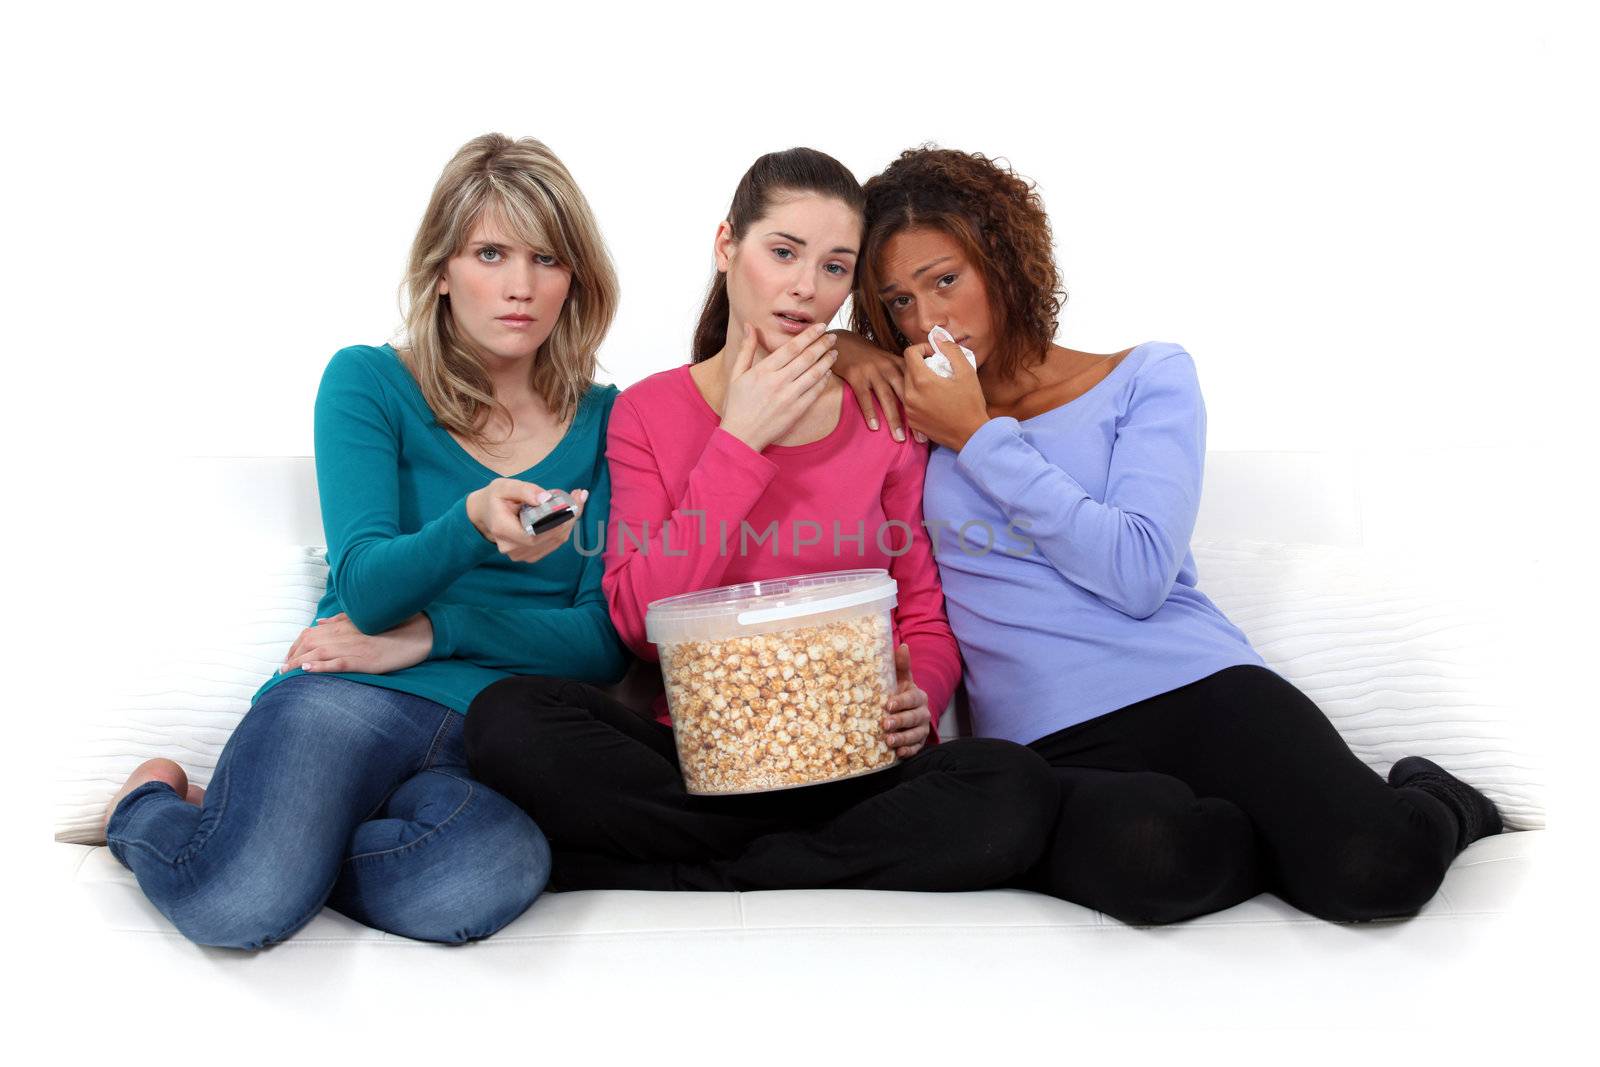 trio of girls crying over sad movie by phovoir